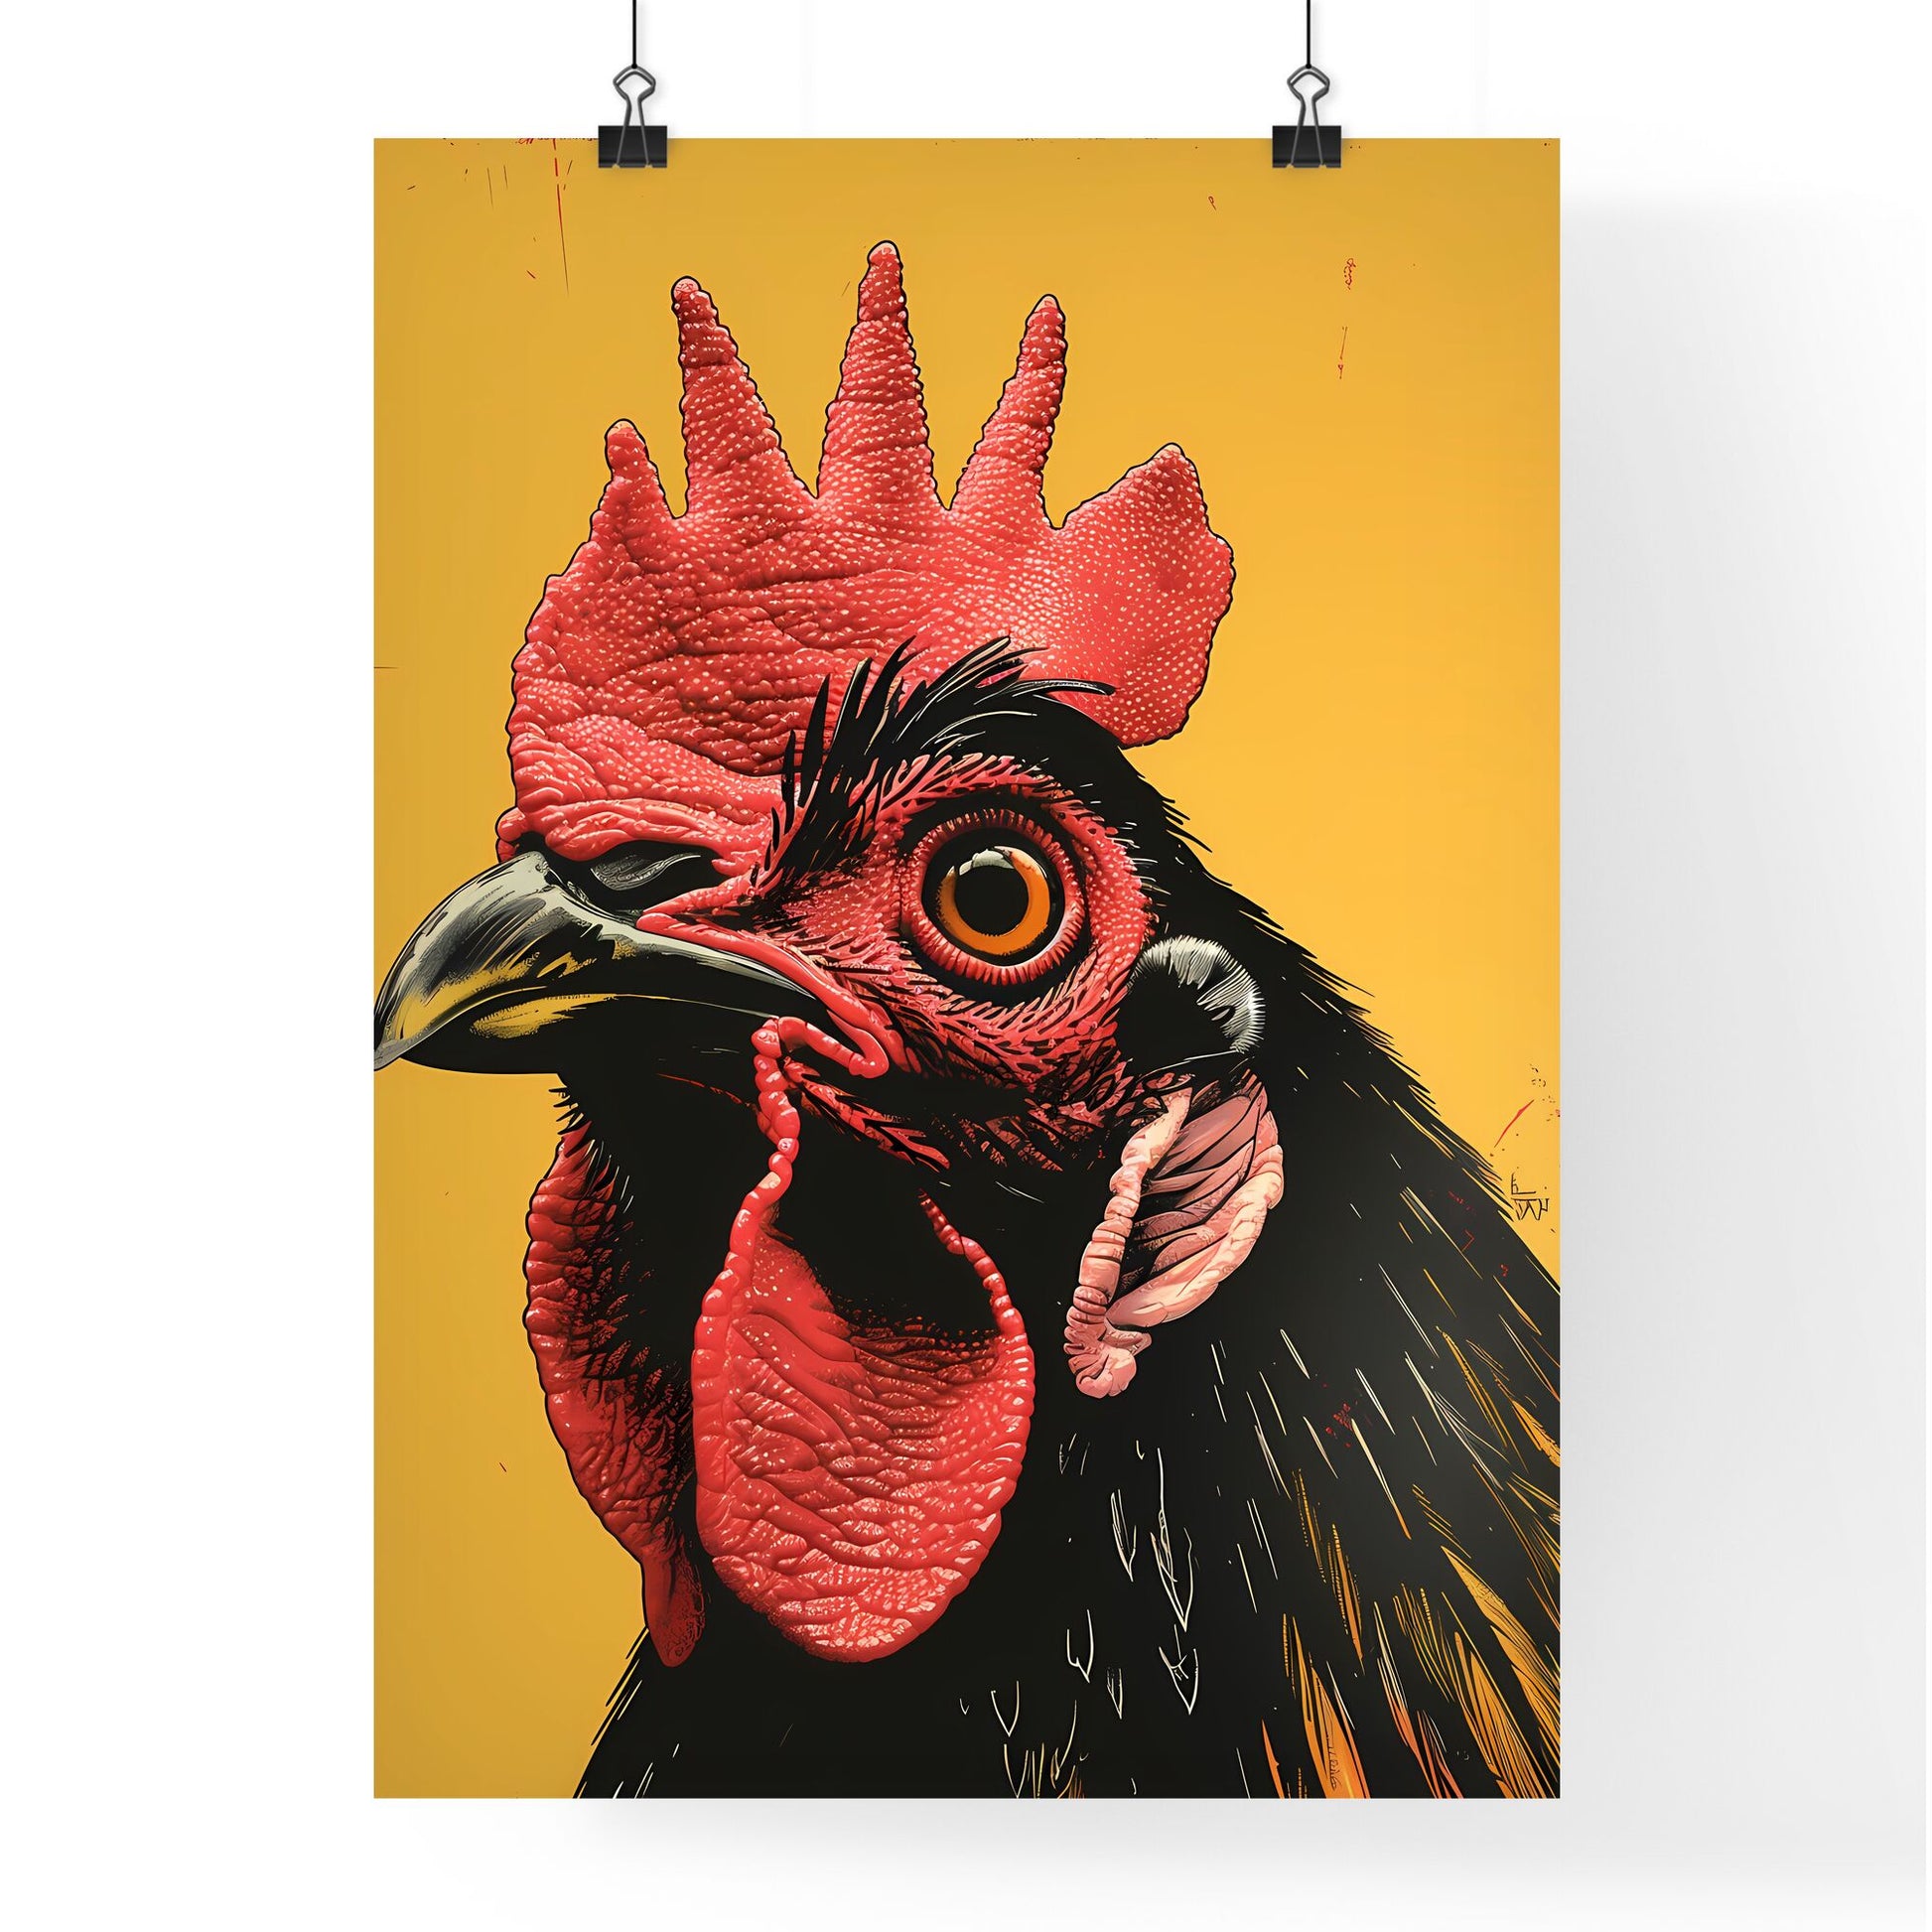 Pop-art rooster painting with red comb and vibrant colors featuring art focus Default Title